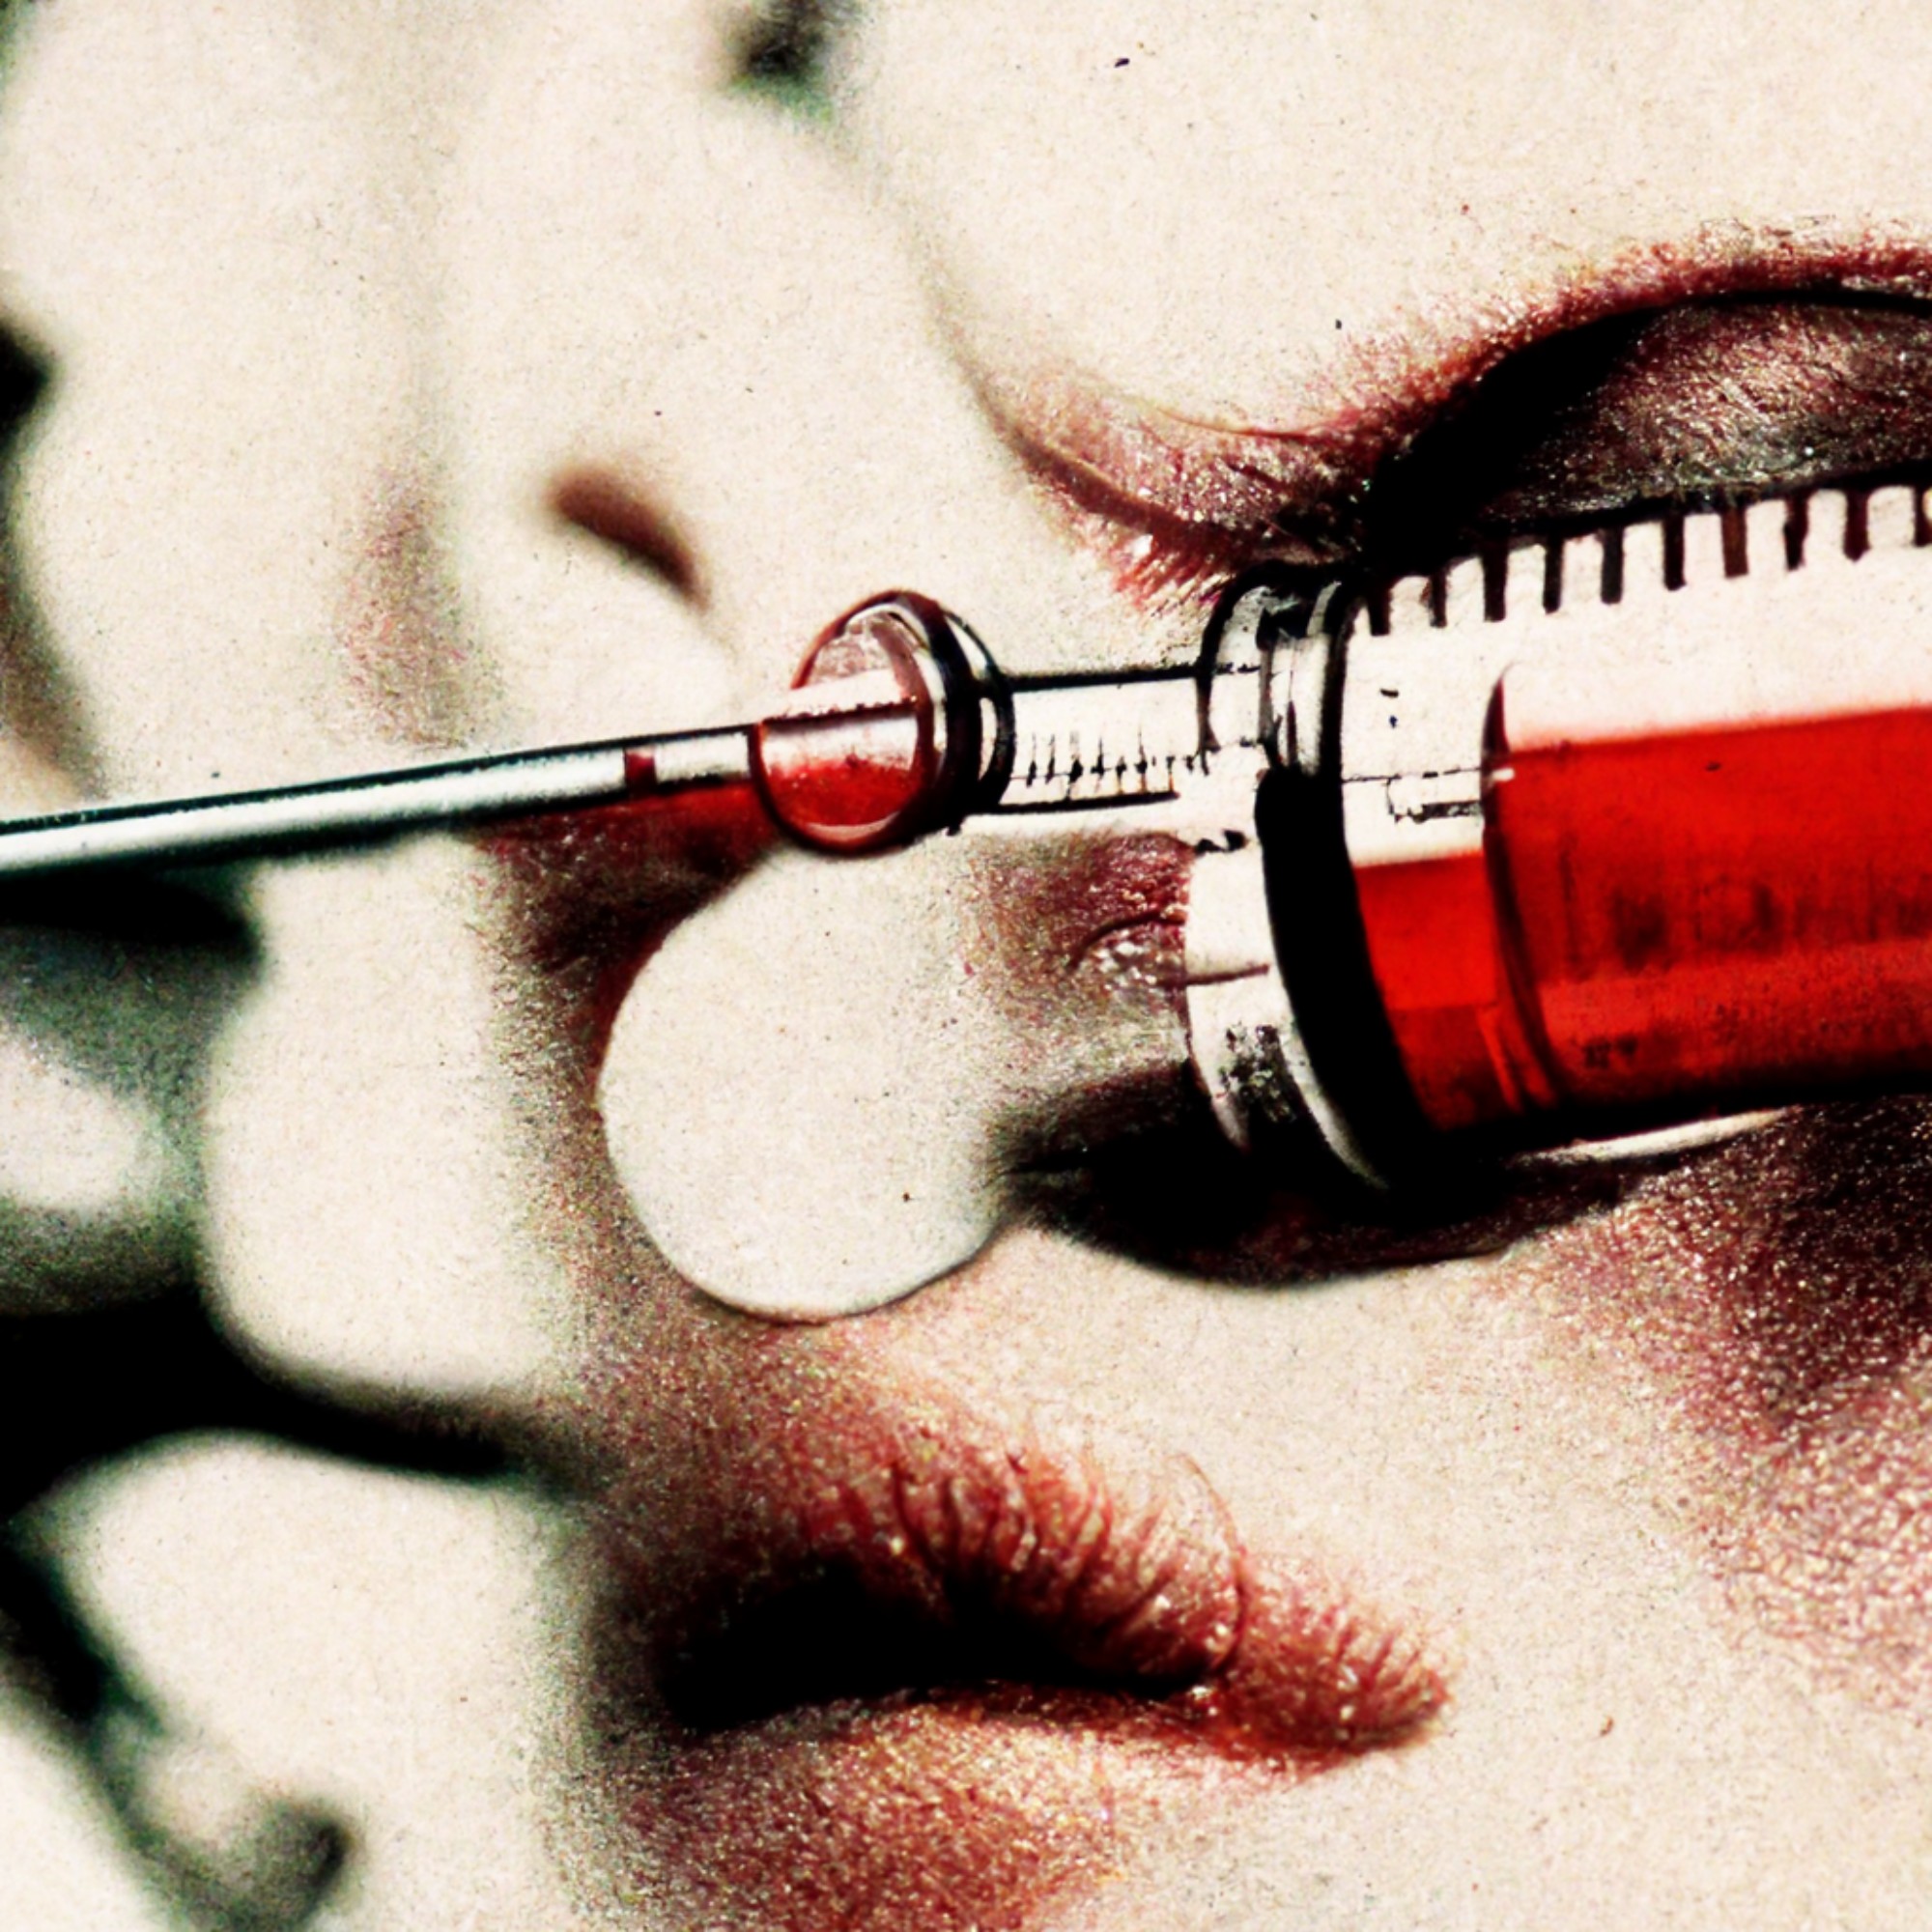 Extreme close-up of a syringe in front of someone's face